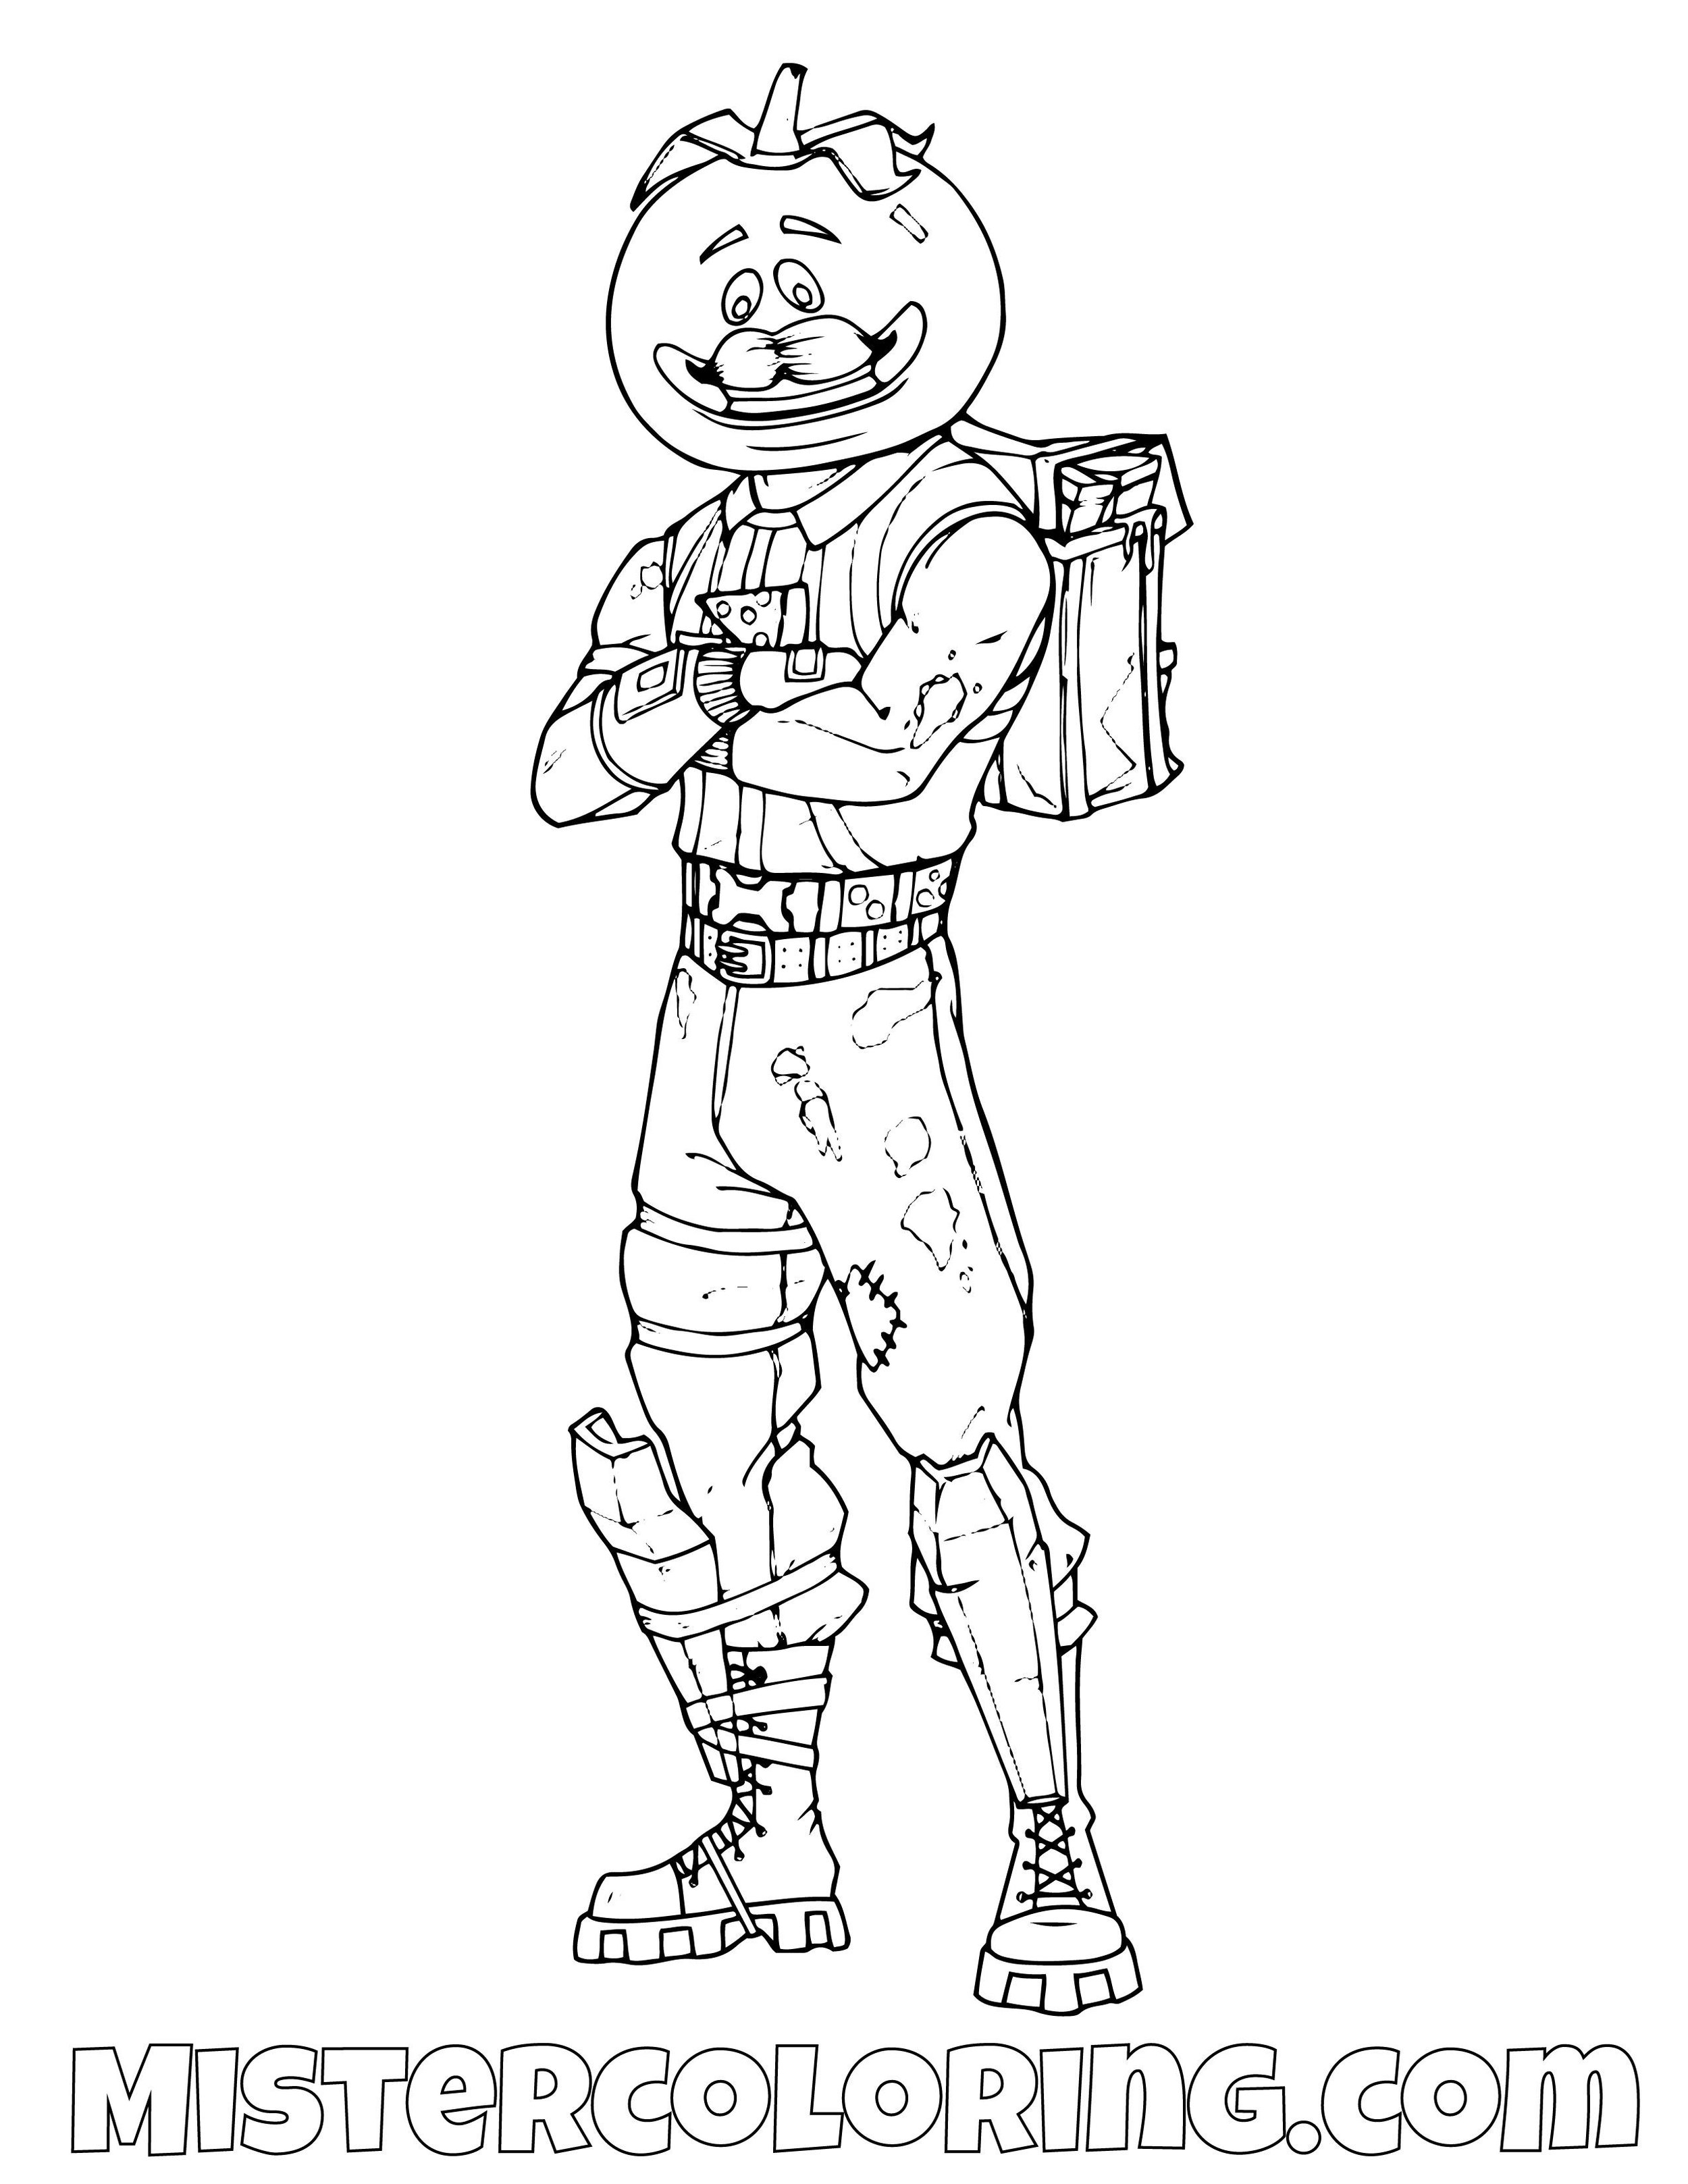 Fortnite Coloring Pages For Kids Mister Coloring